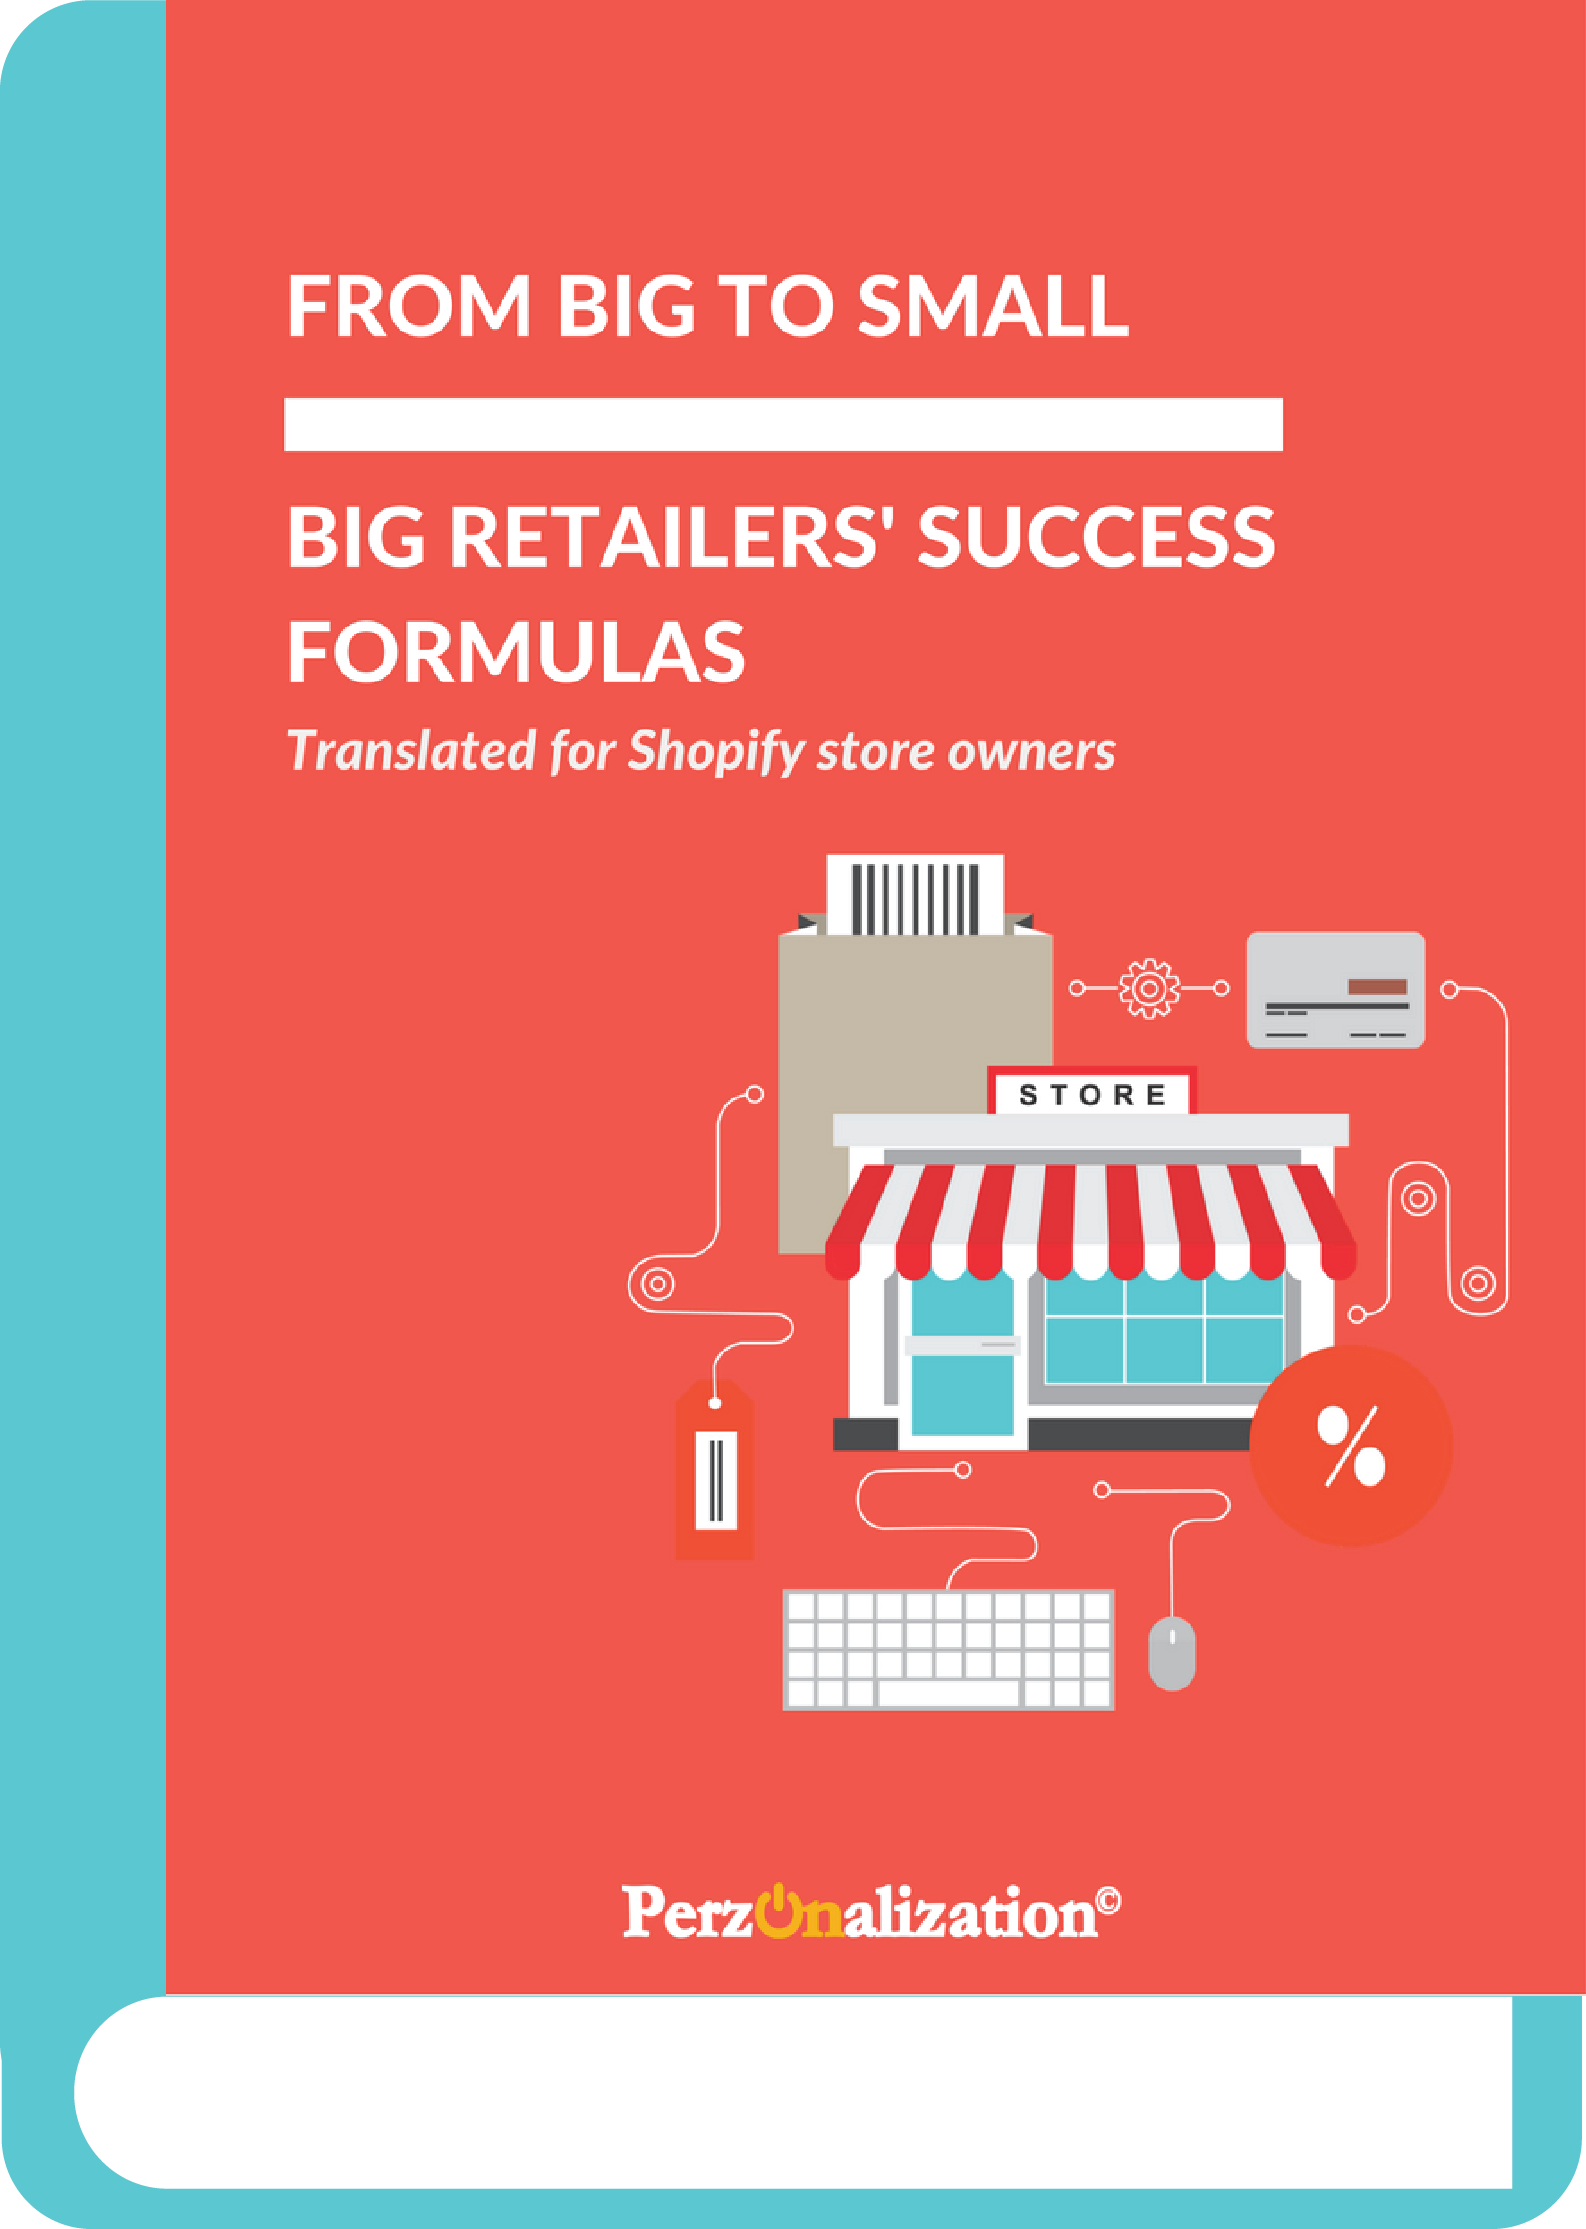 Big retailers were once small and with the help of effective strategies, they've managed to grow. This is an eBook for the Shopify store owners to get inspiration from the success stories of big players.